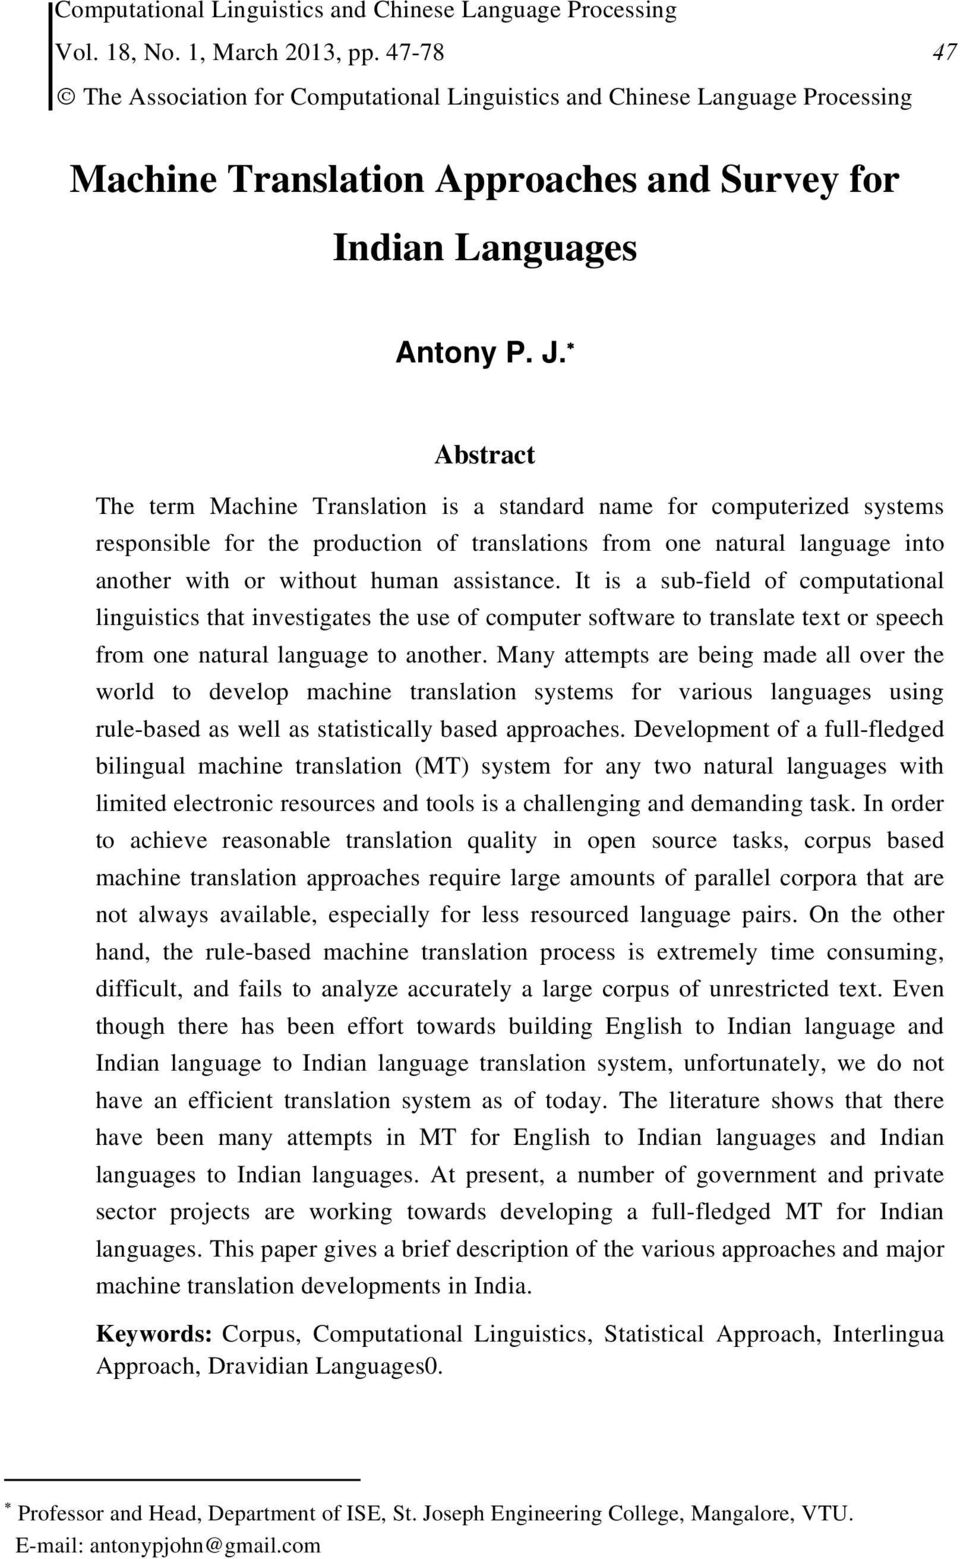 Abstract The term Machine Translation is a standard name for computerized systems responsible for the production of translations from one natural language into another with or without human